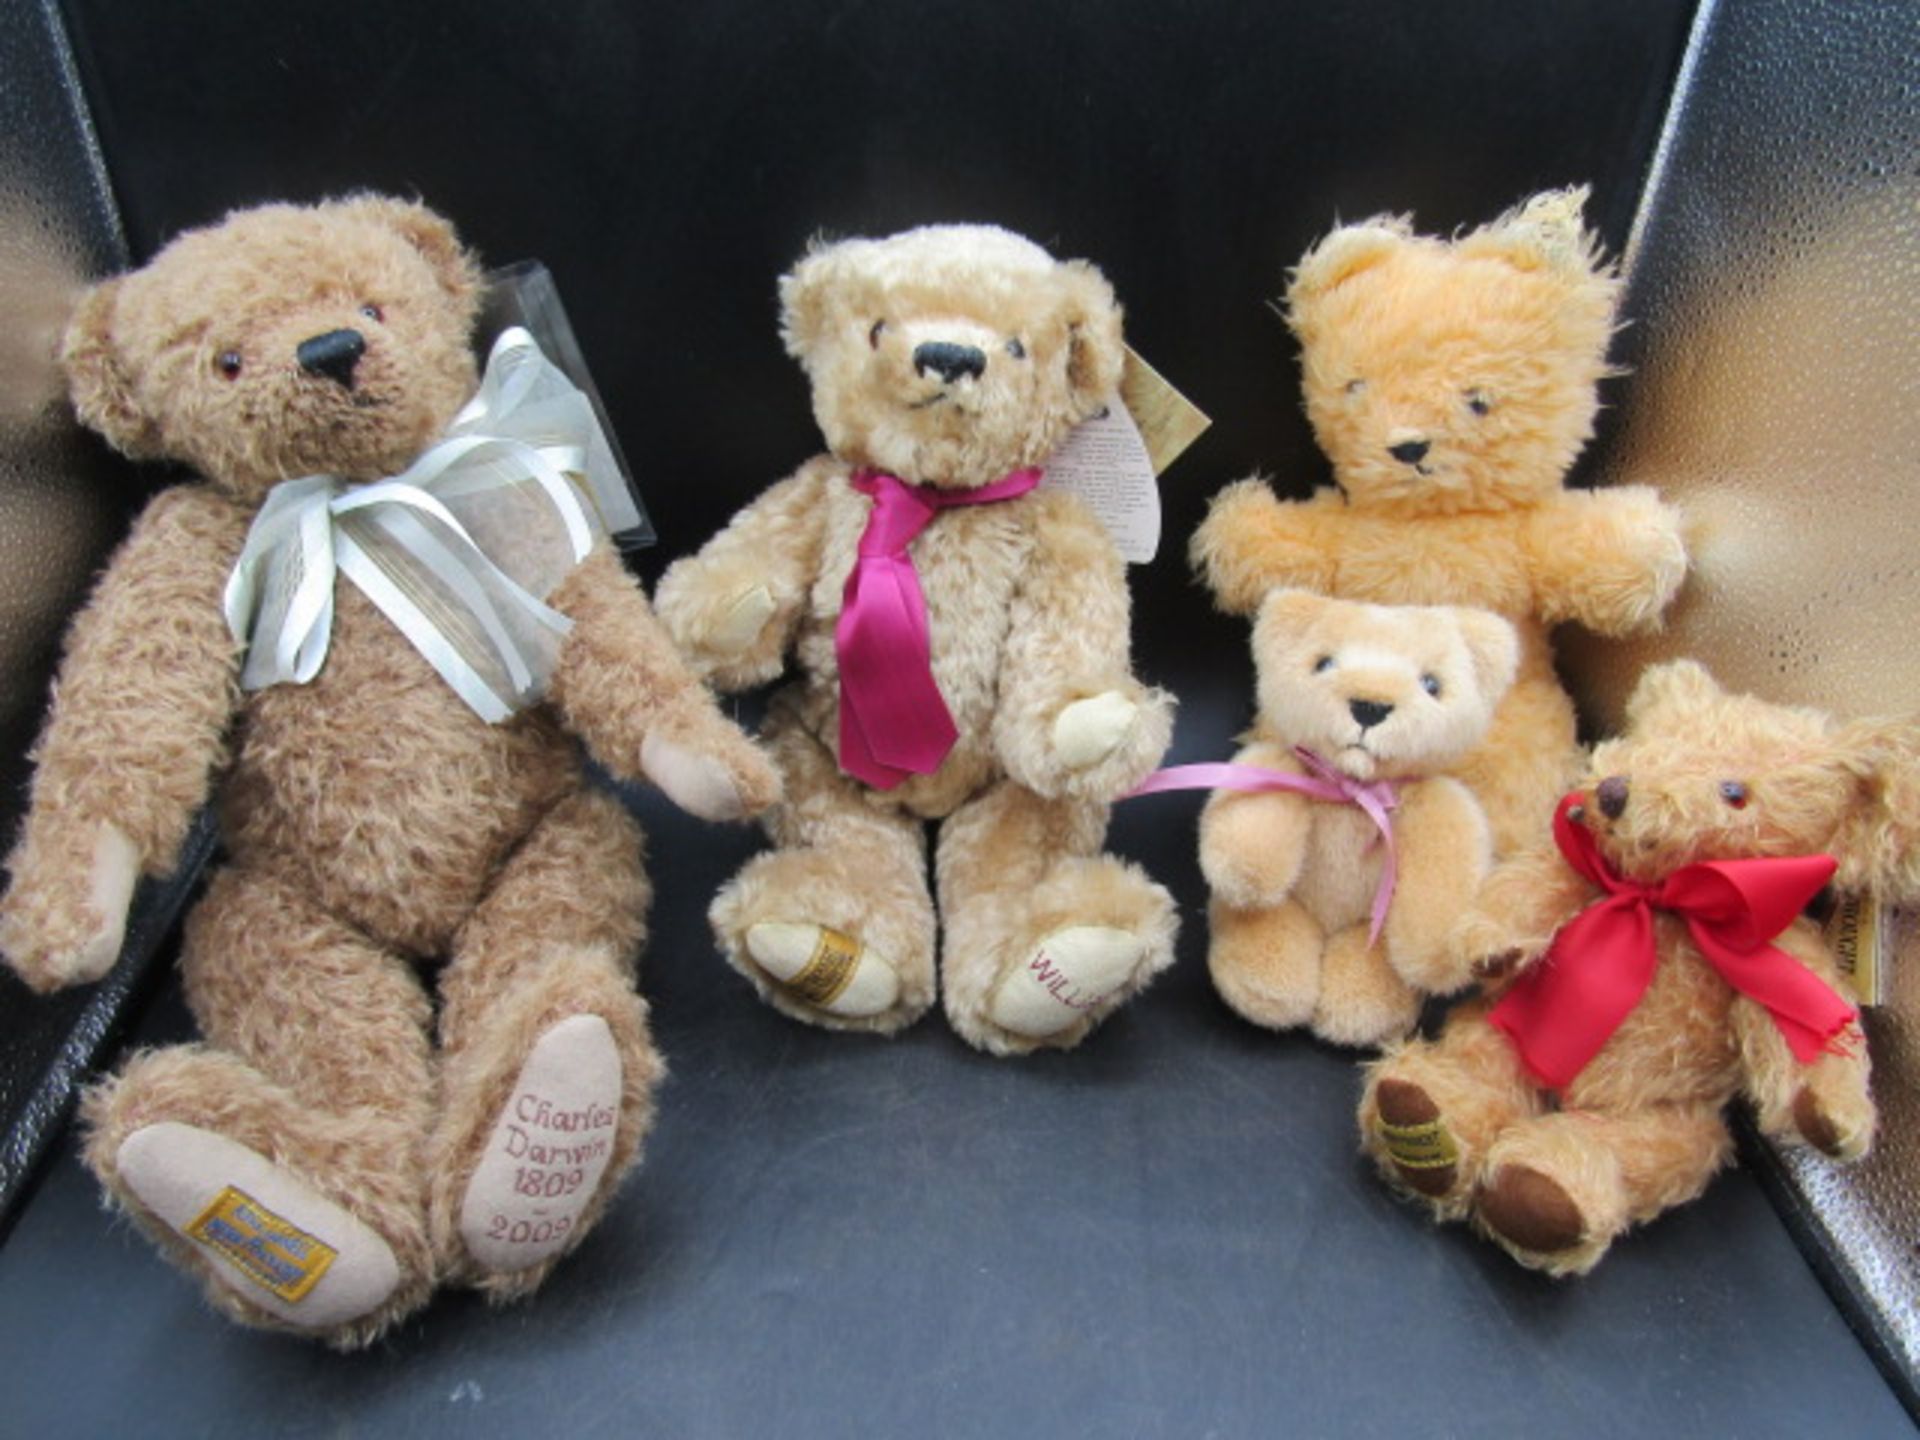 4 Merrythought bears and one other